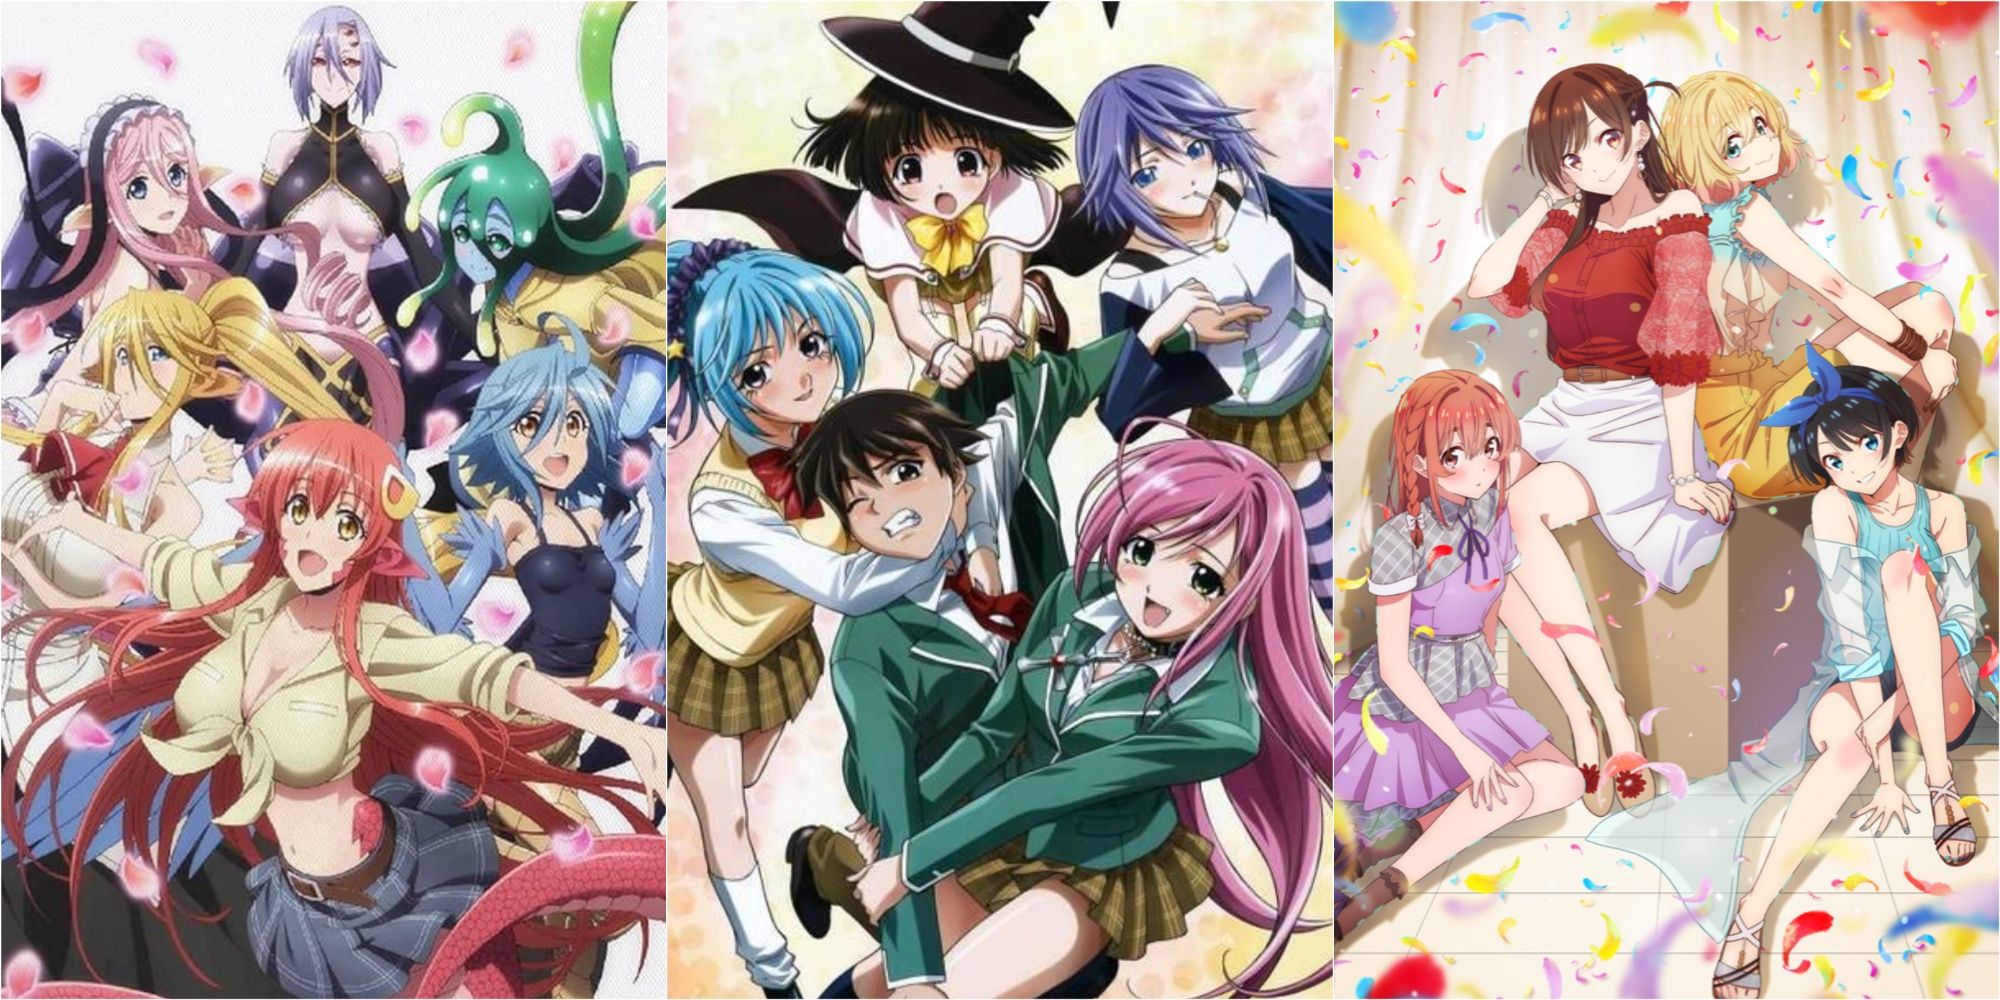 Best 50 Harem Anime You'll Fall in Love With Waifus | 1Screen Magazine